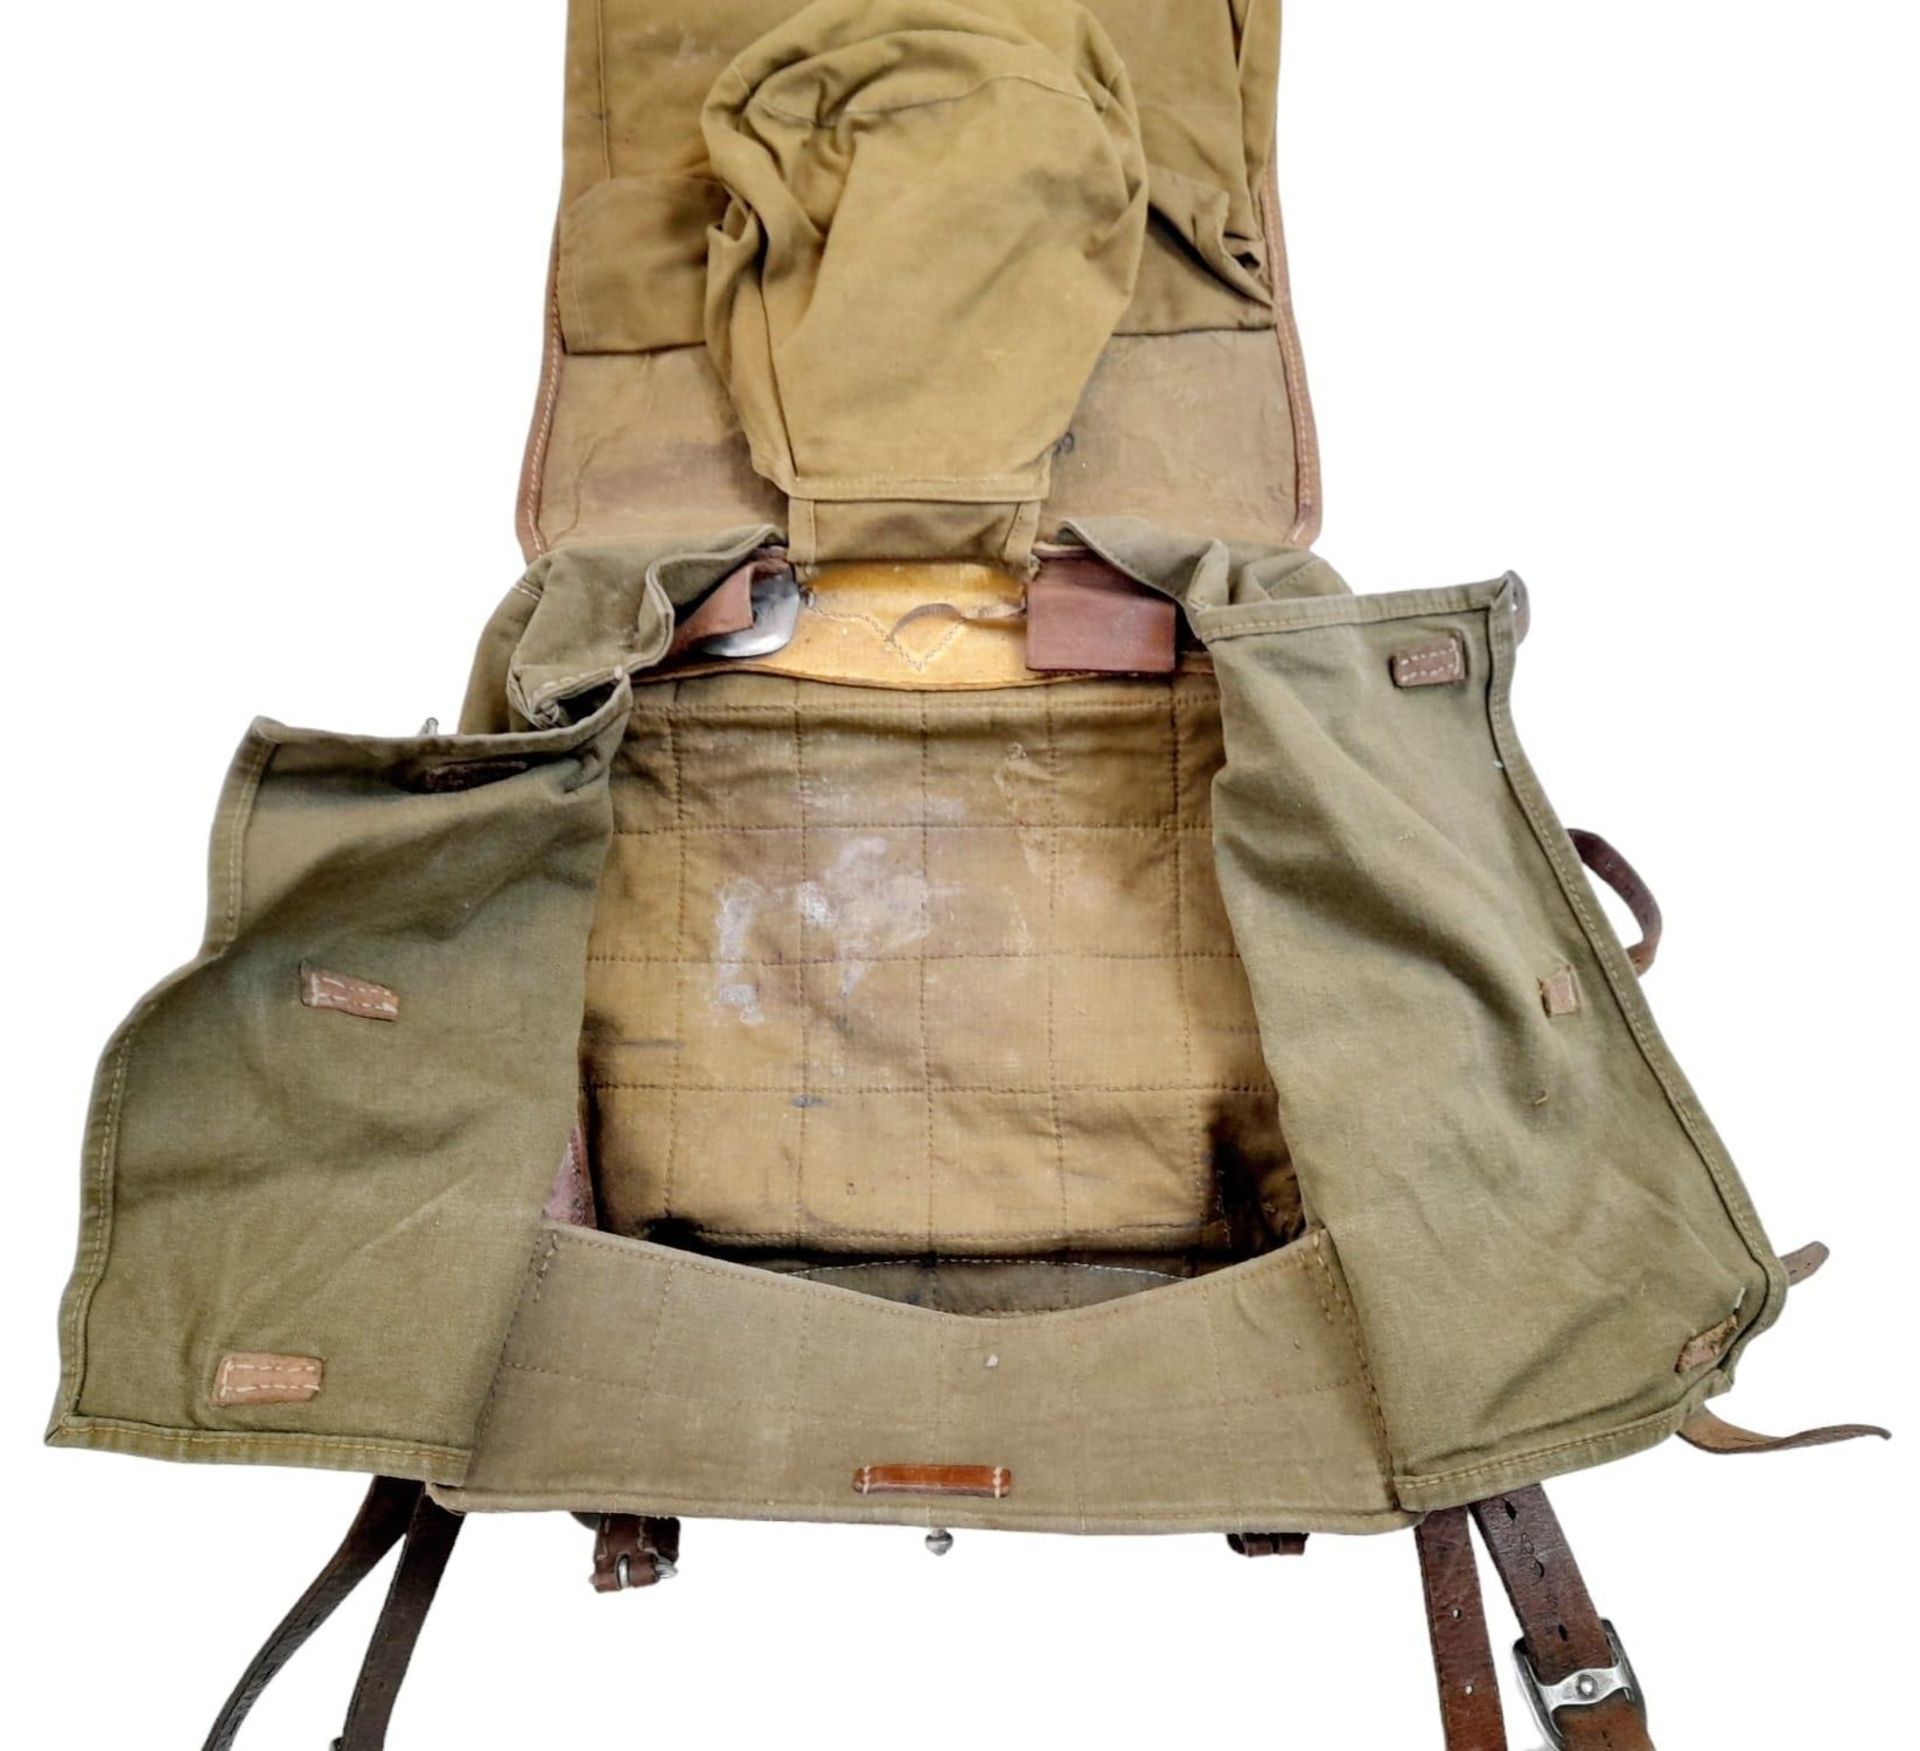 WW2 German Tournister “Pony Pack” Dated 1939. Used by the Hitler Youth and ground troops. - Image 5 of 7